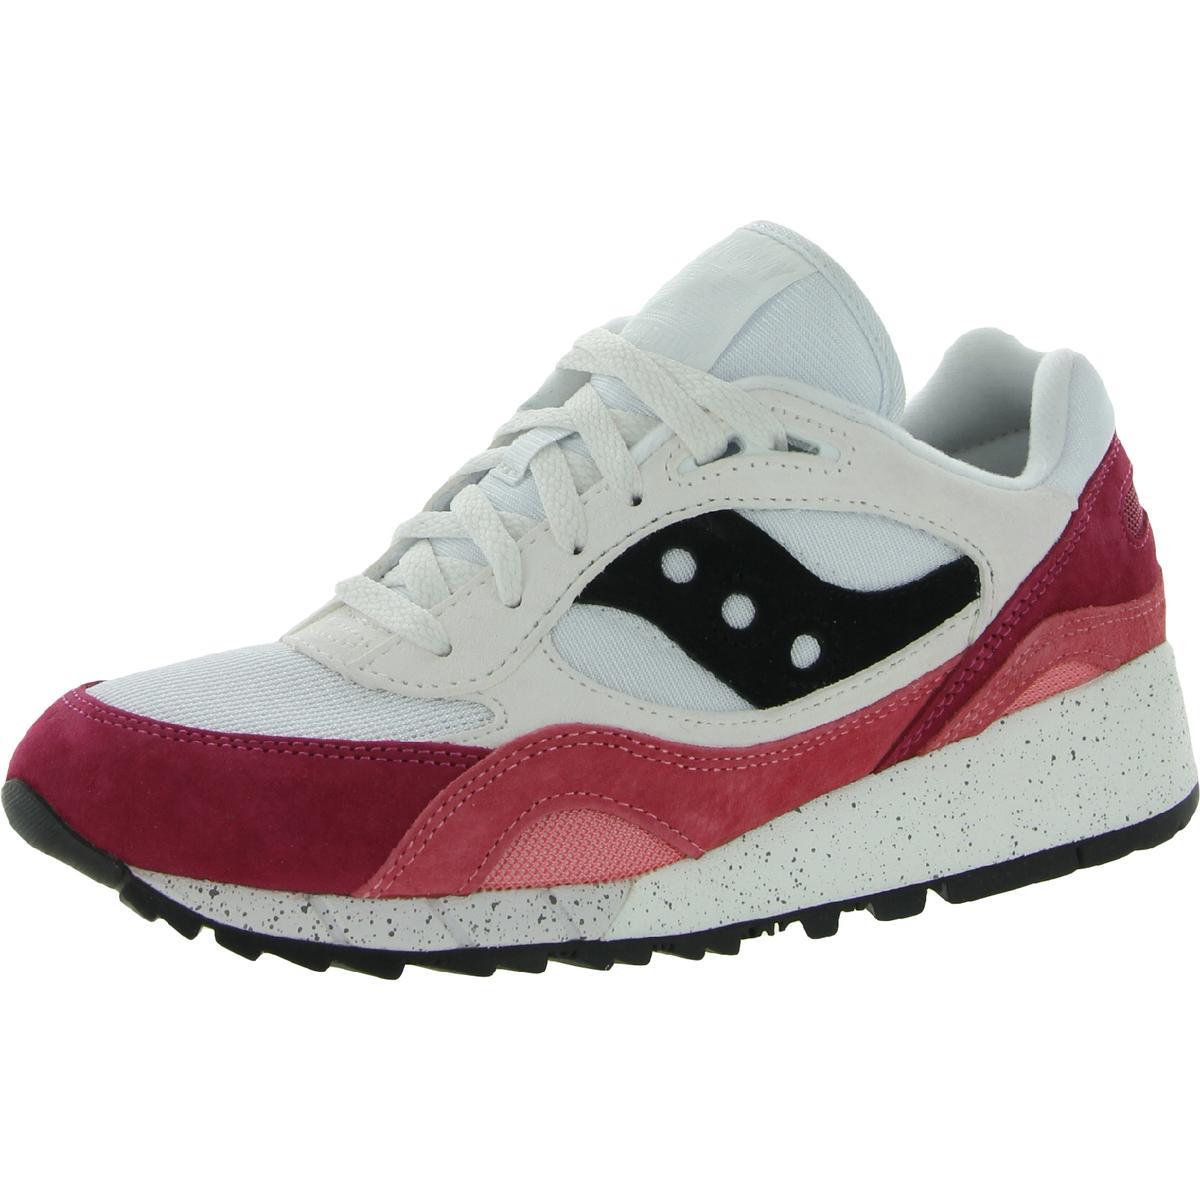 Saucony Men`s Shadow 6000 Leather Retro Inspired Athletic Fashion Sneaker White/Coral